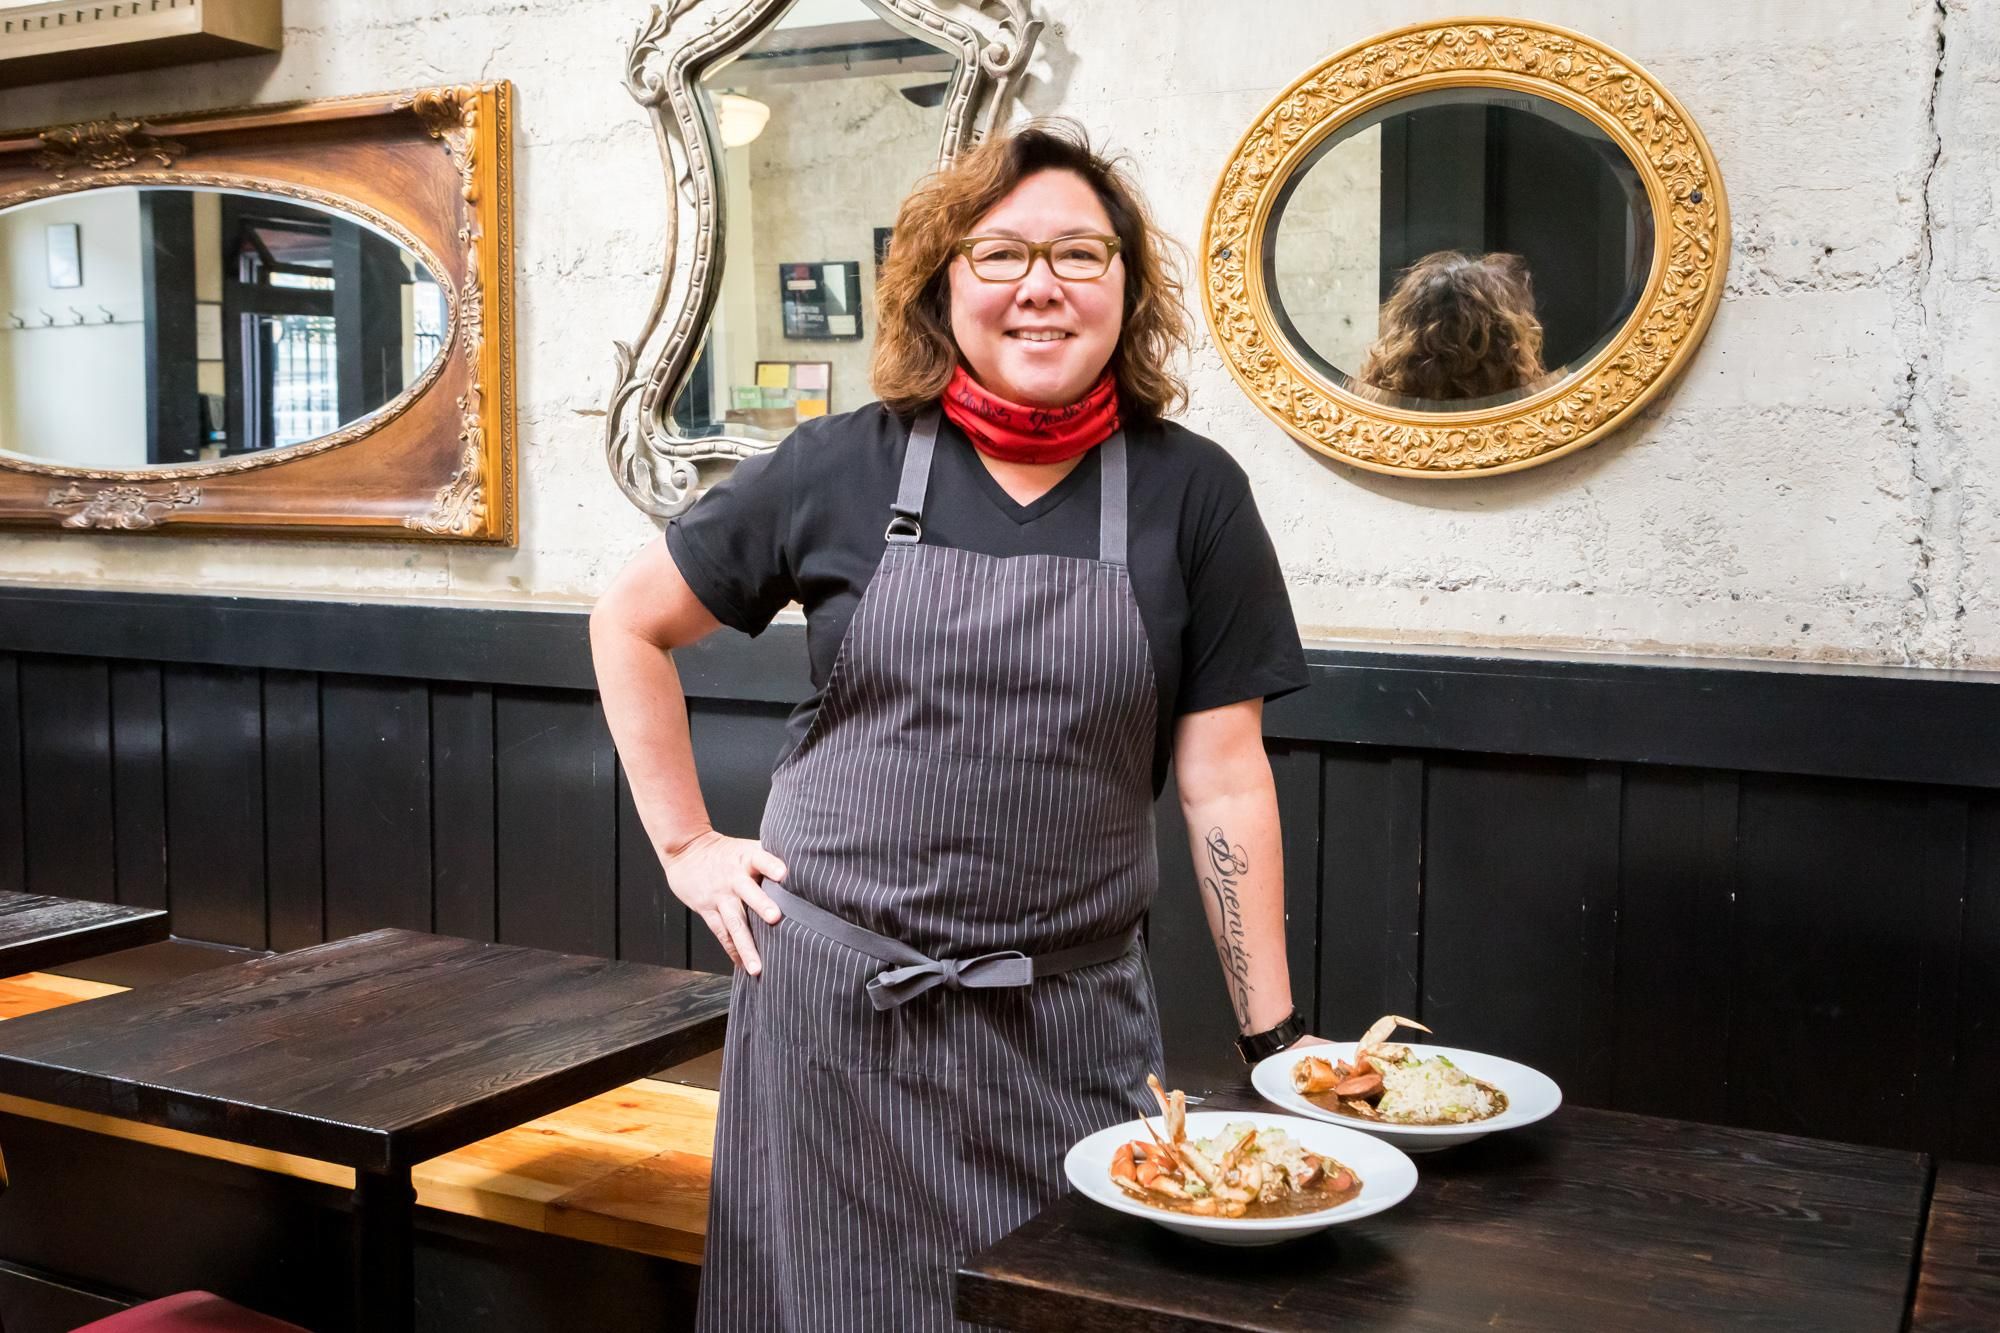 It took YouTube by storm—now chef Brenda Buenviaje's cajun gumbo can spice up your holiday season.